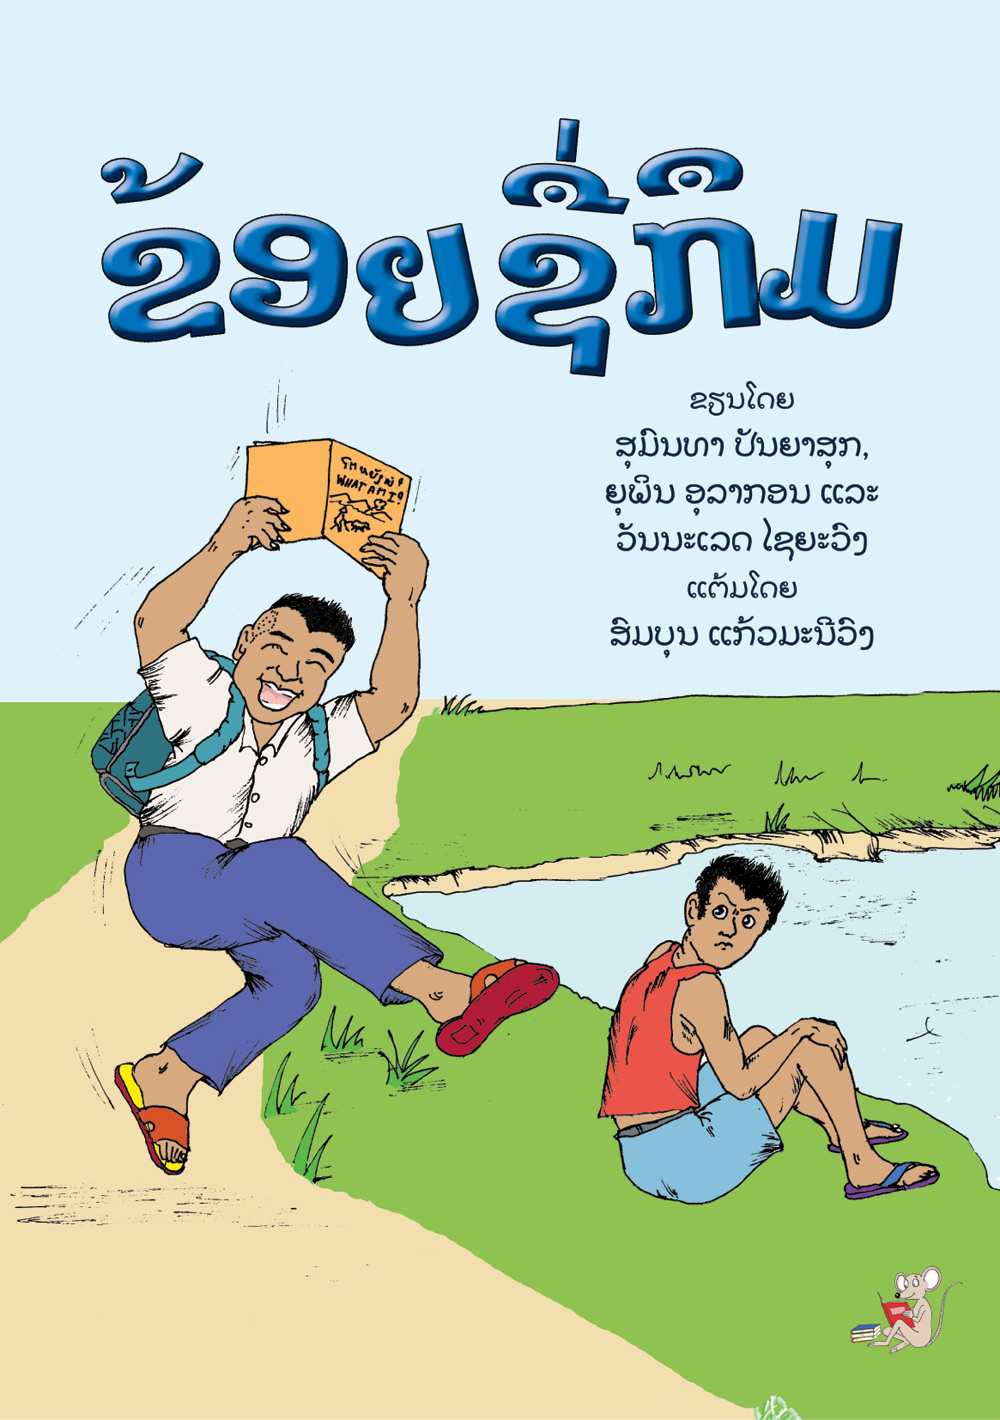 I am Geum large book cover, published in Lao language